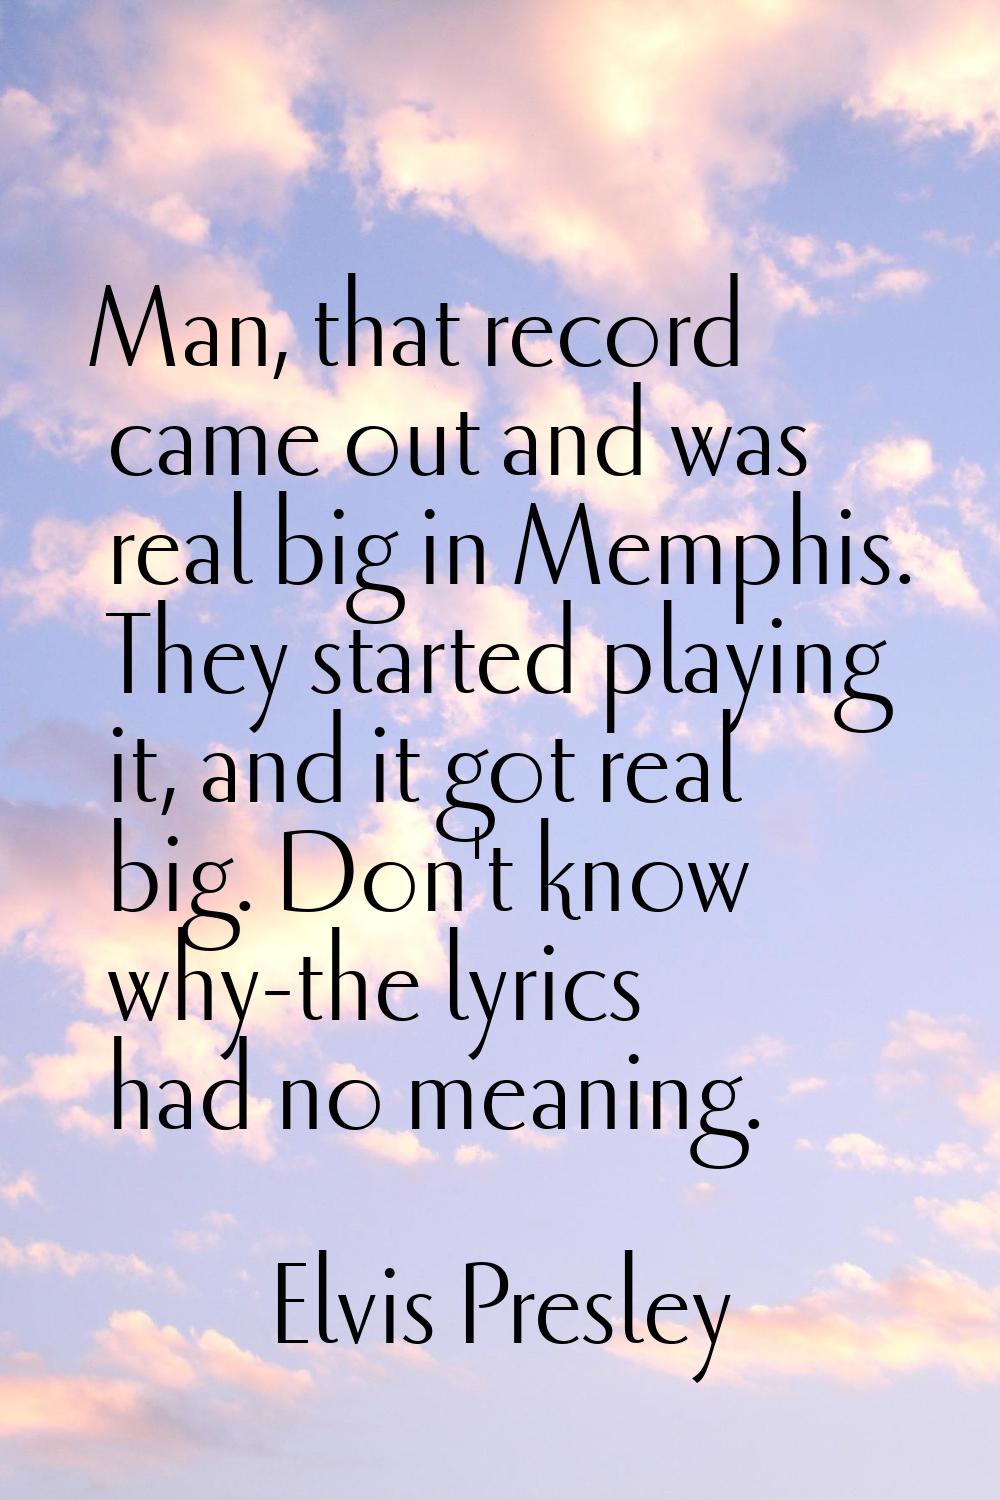 Man, that record came out and was real big in Memphis. They started playing it, and it got real big